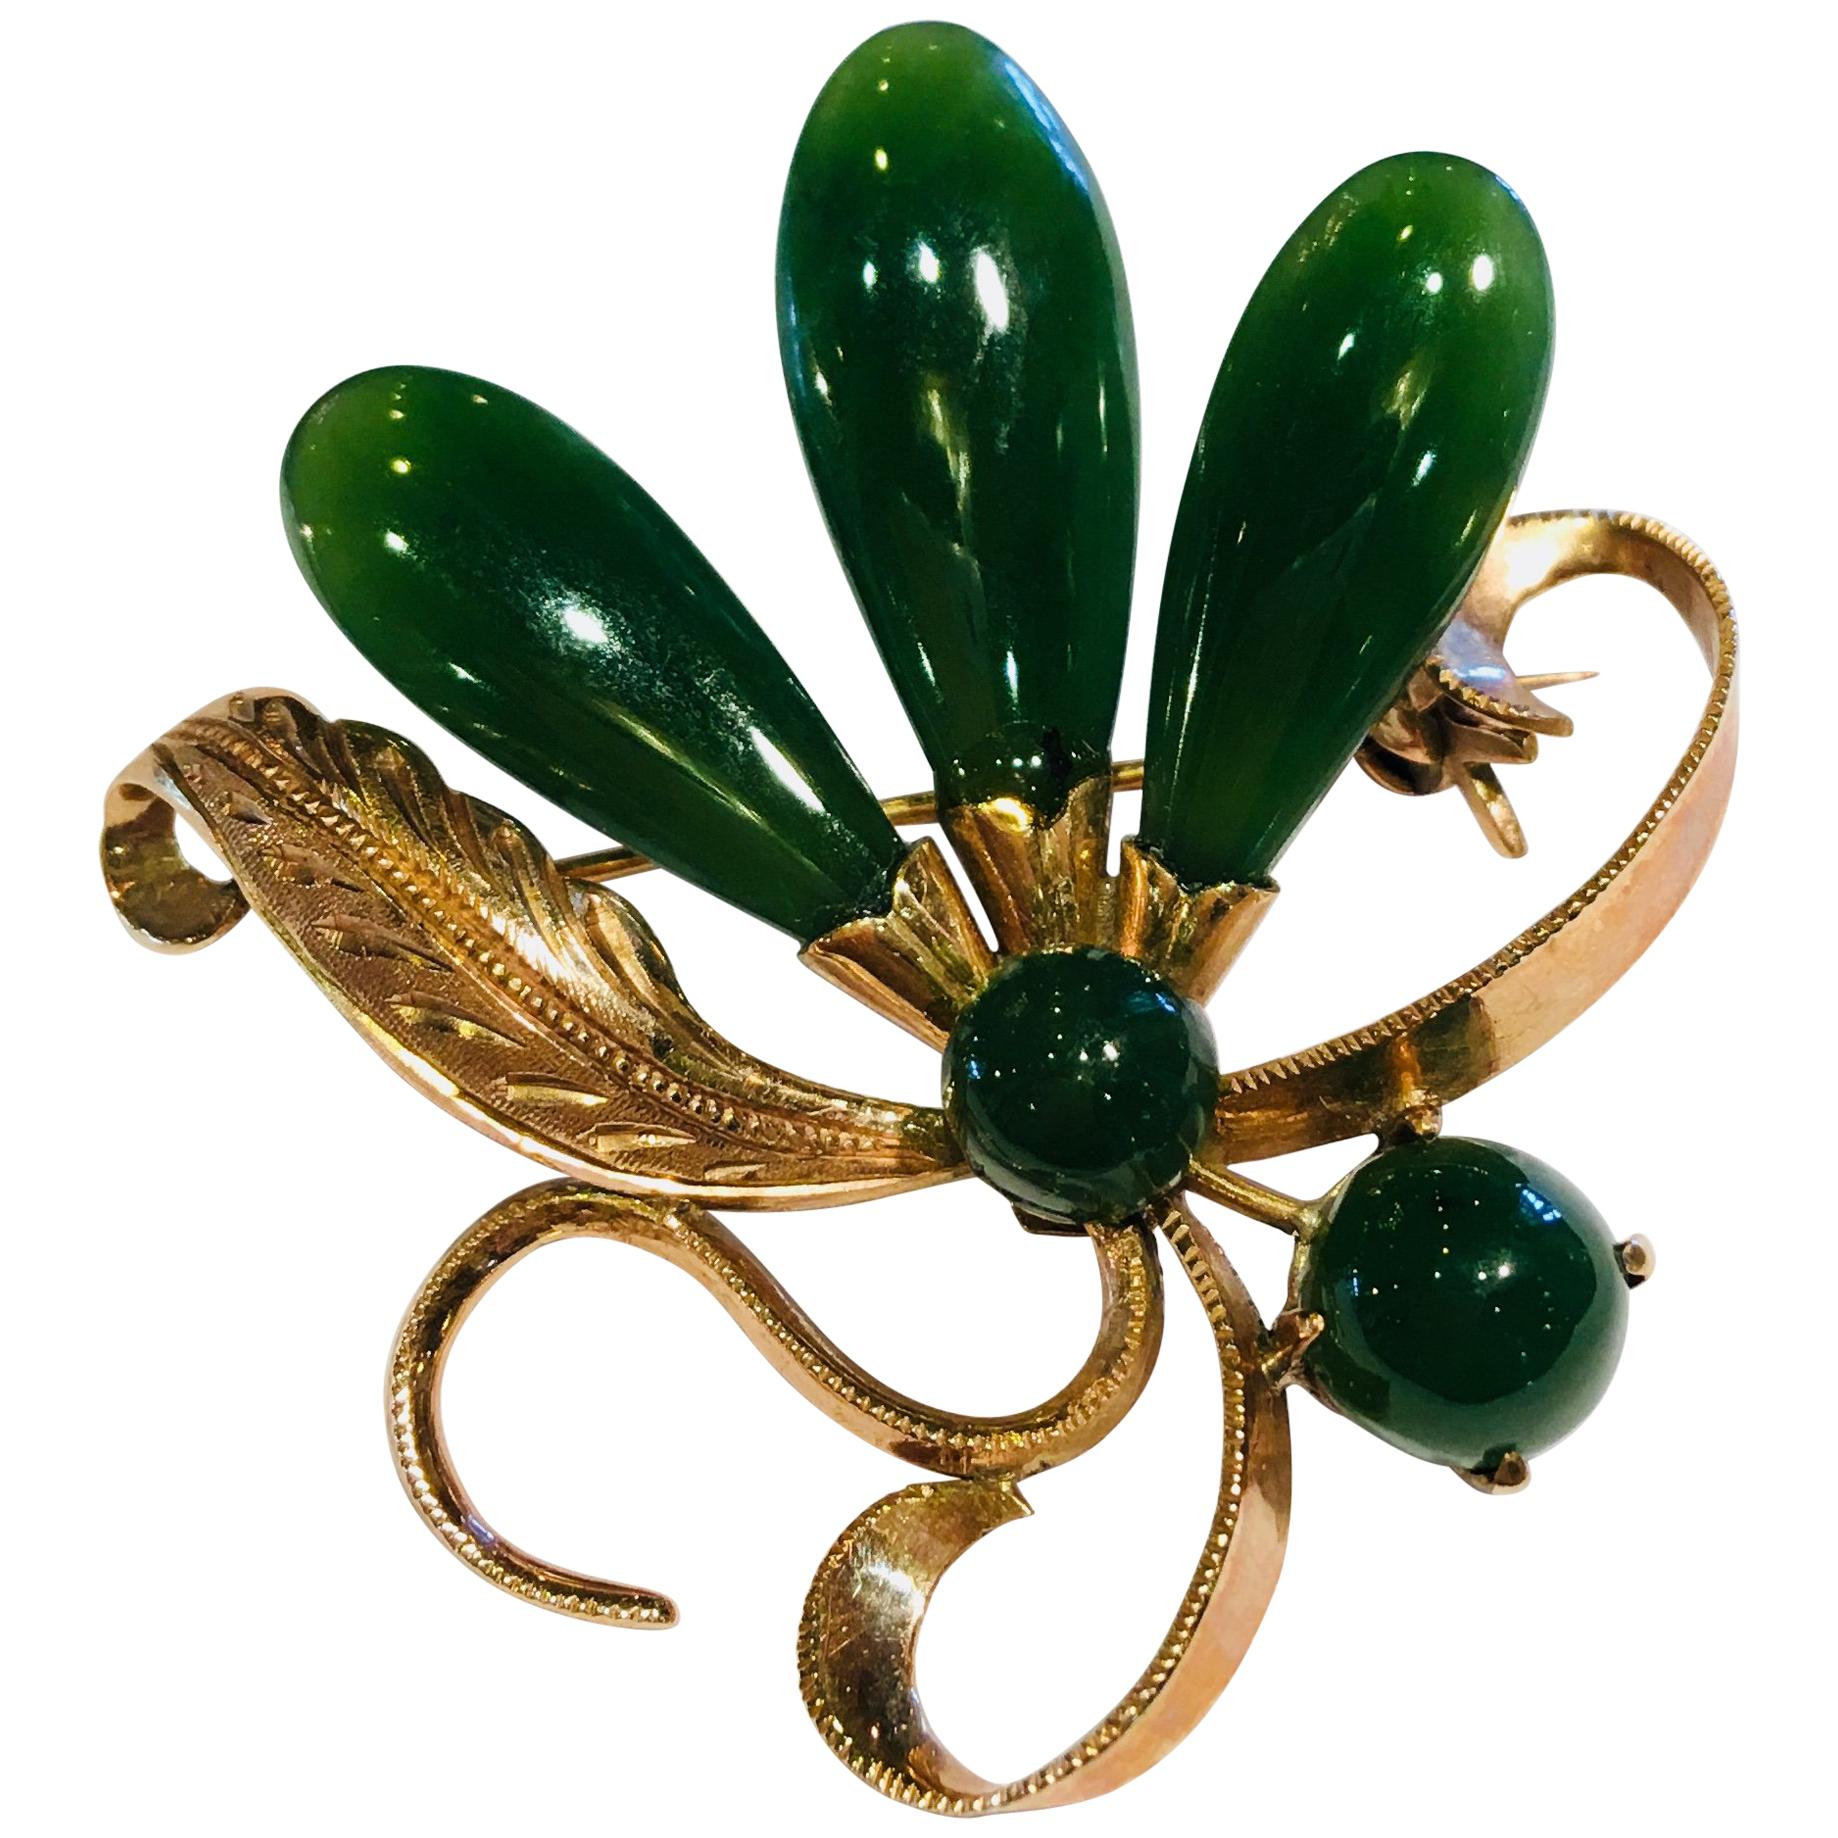 1950s Round and Teardrop Green Jade 18 Karat Gold Brooch Pin with Floral Motif